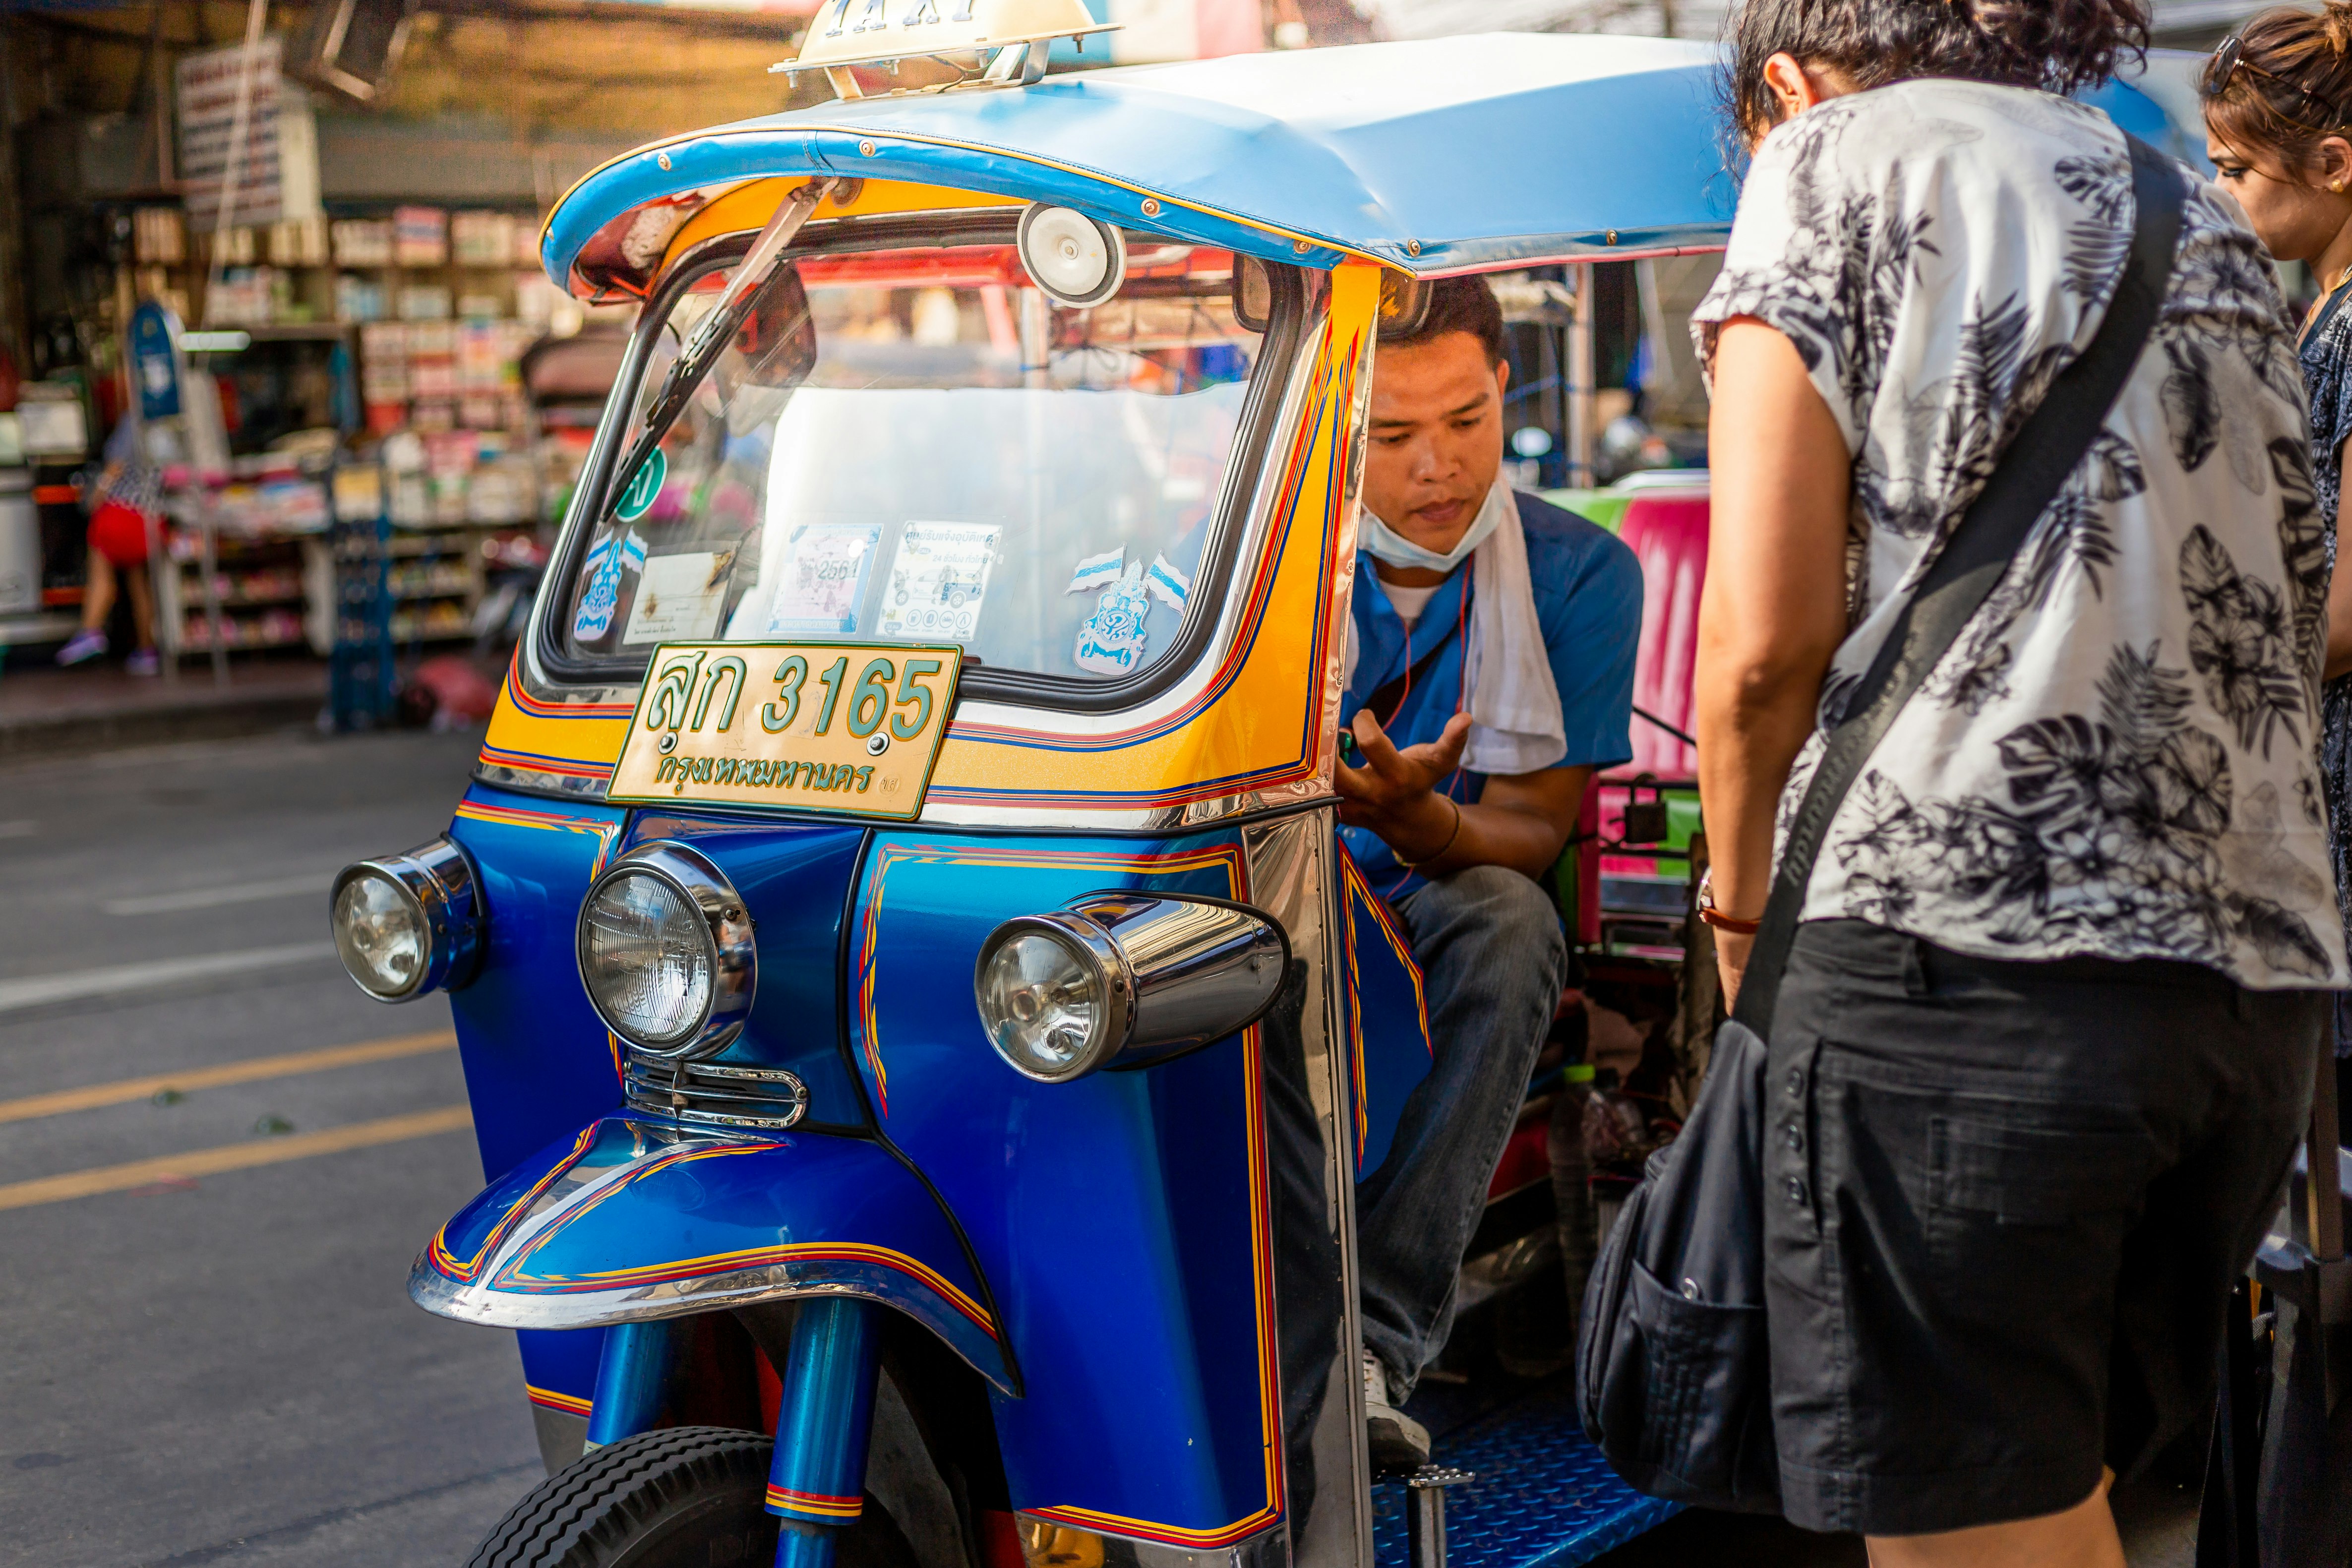 Two women consult with a tuk tuk driver at the side of a road in Bangkok. The small, striking vehicle is painted yellow and blue.